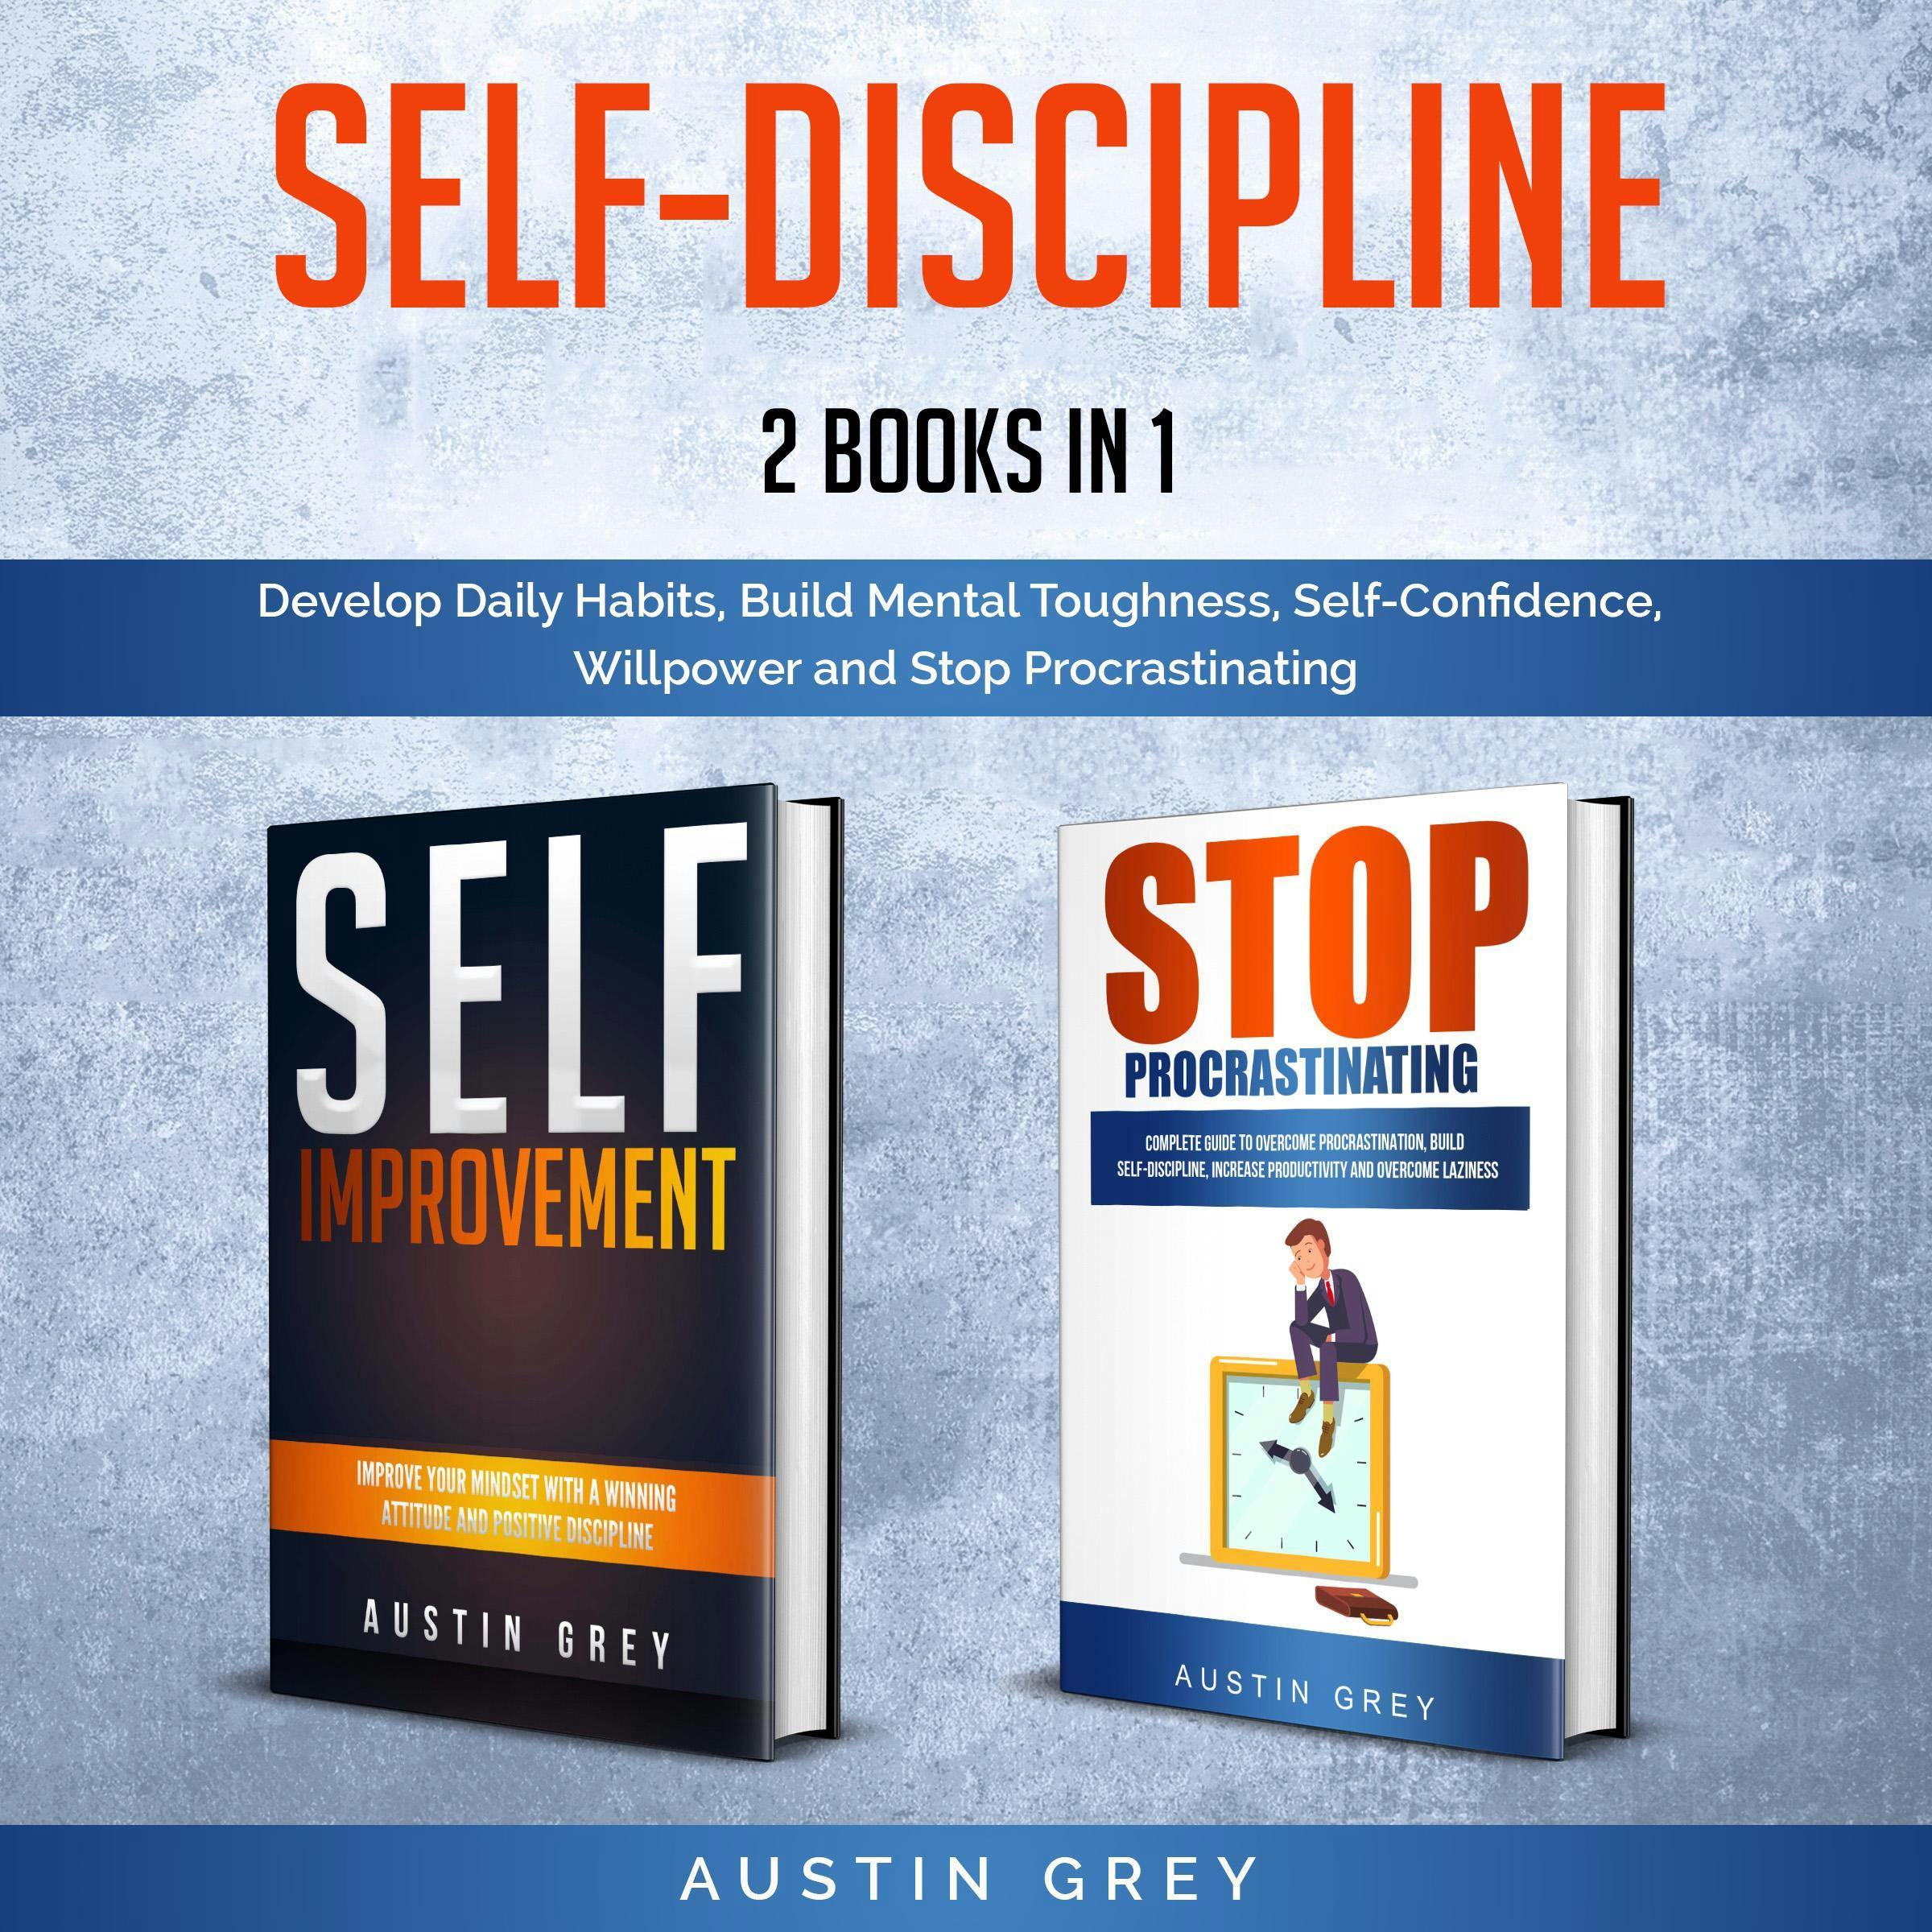 Self-Discipline, 2 Books in 1: Develop Daily Habits, Build Mental Toughness, Self-Confidence, Willpower and Stop Procrastinating - undefined